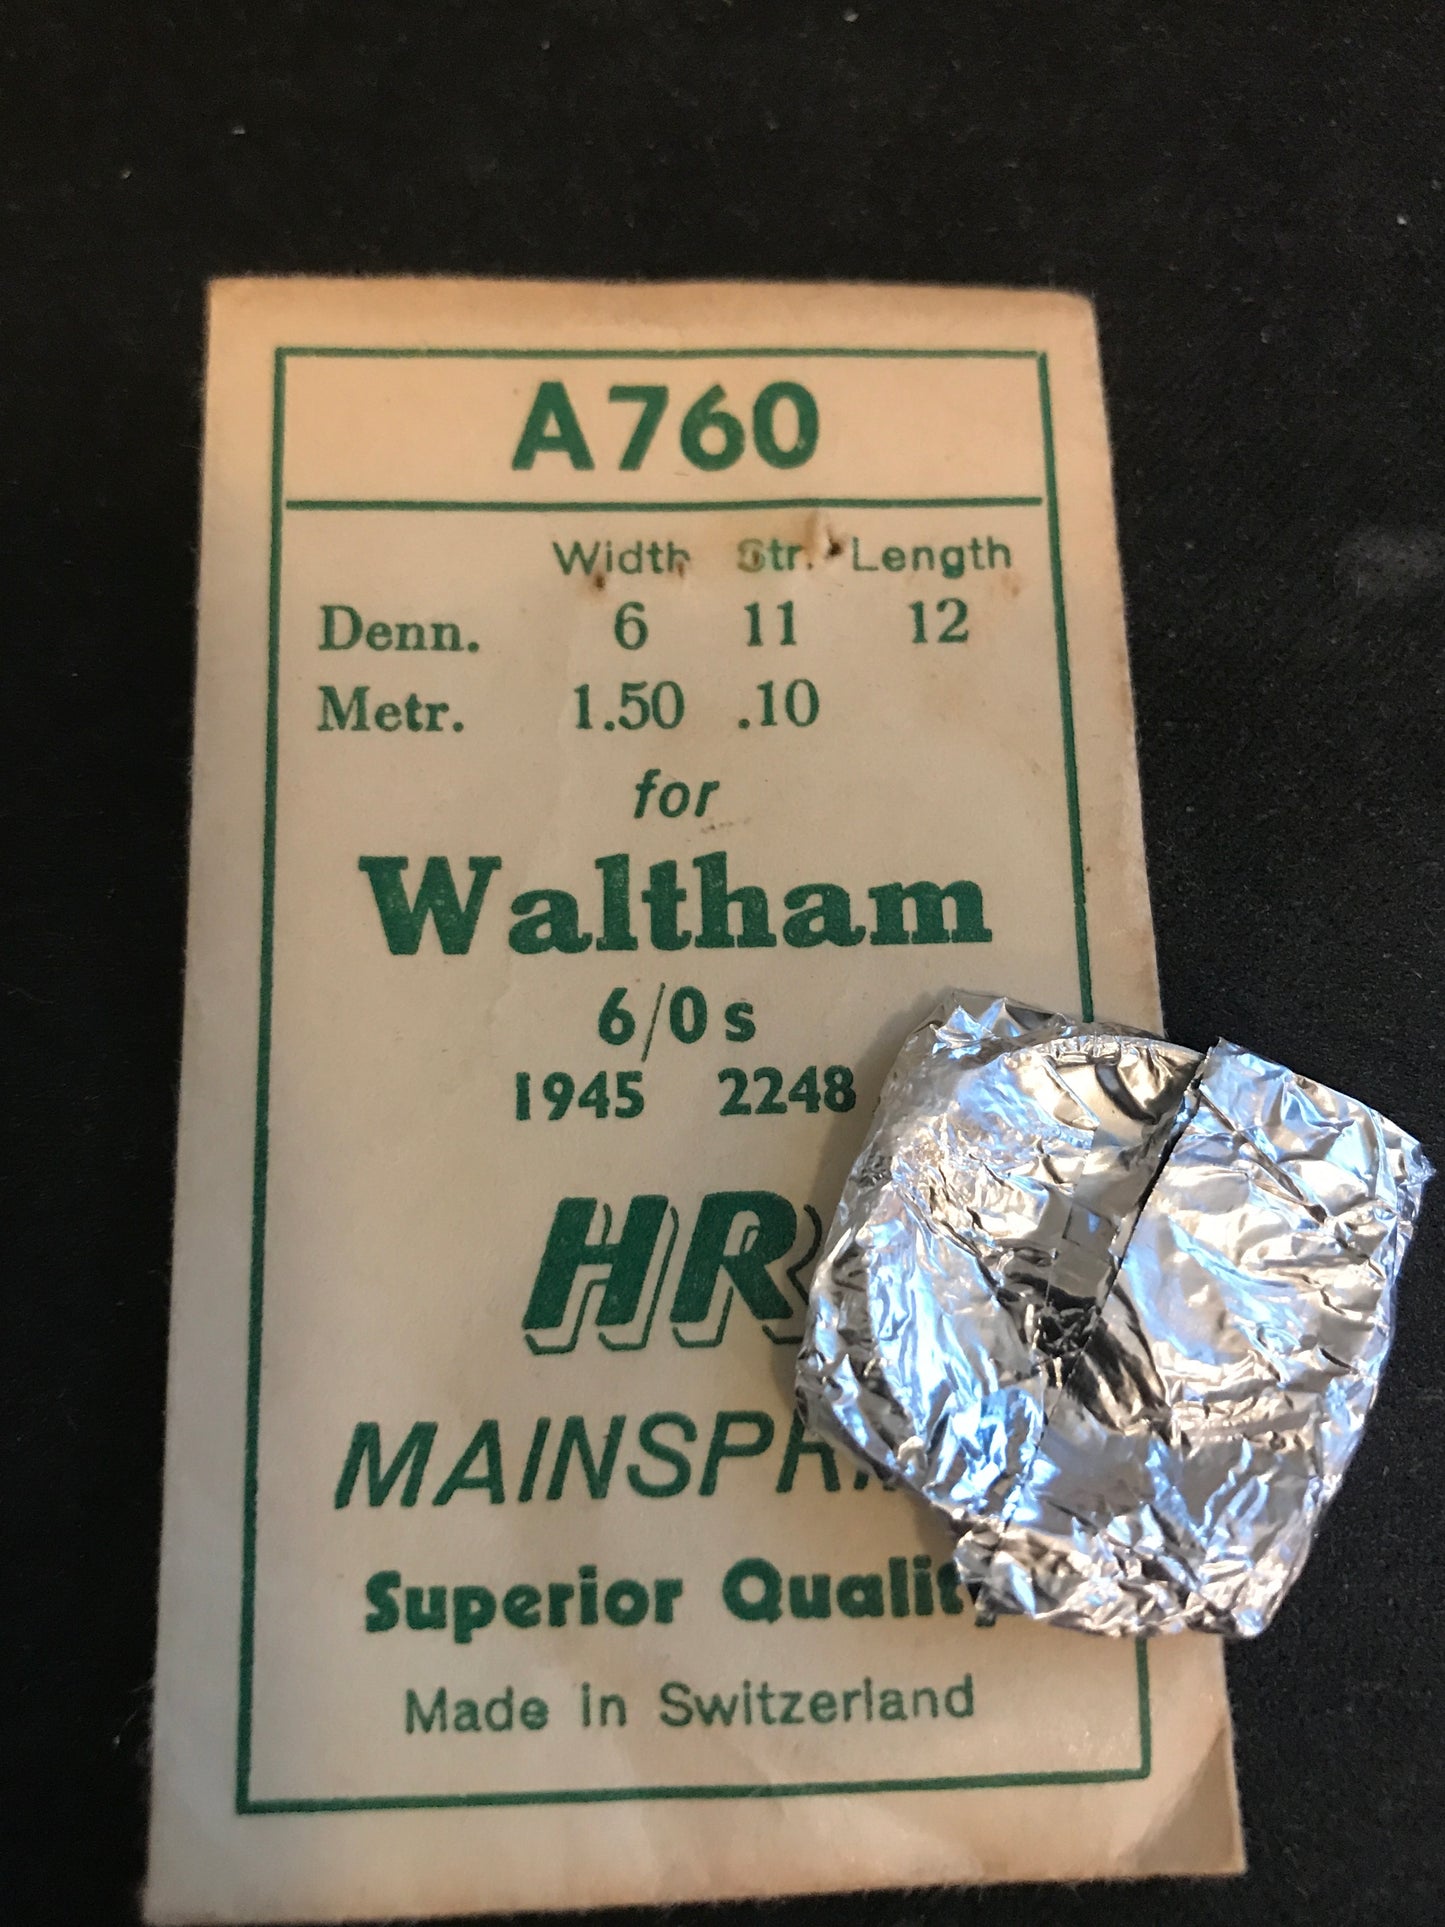 HR Mainspring A760 for Waltham 6/0s "C" & "D" Model 1945 No. 2248 - Steel